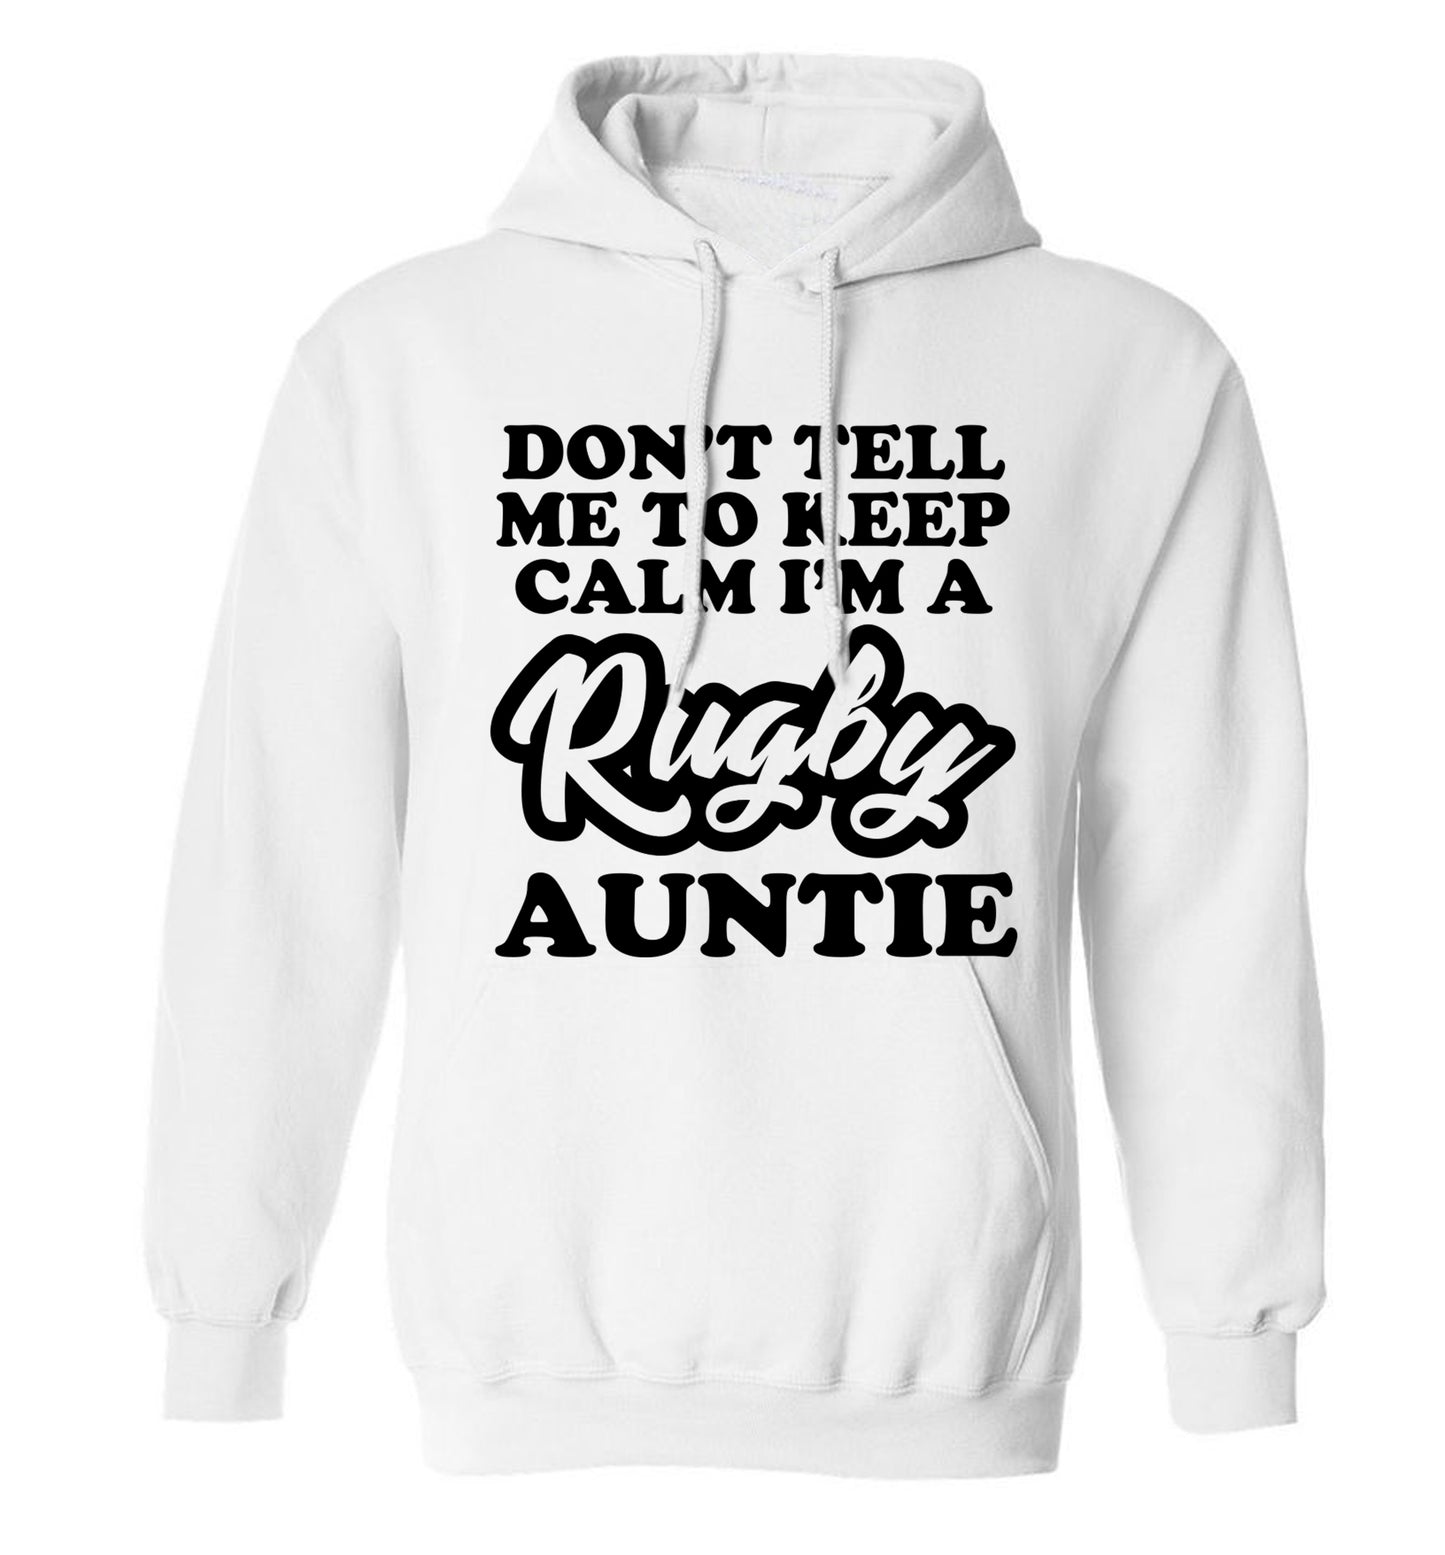 Don't tell me keep calm I'm a rugby auntie adults unisex white hoodie 2XL